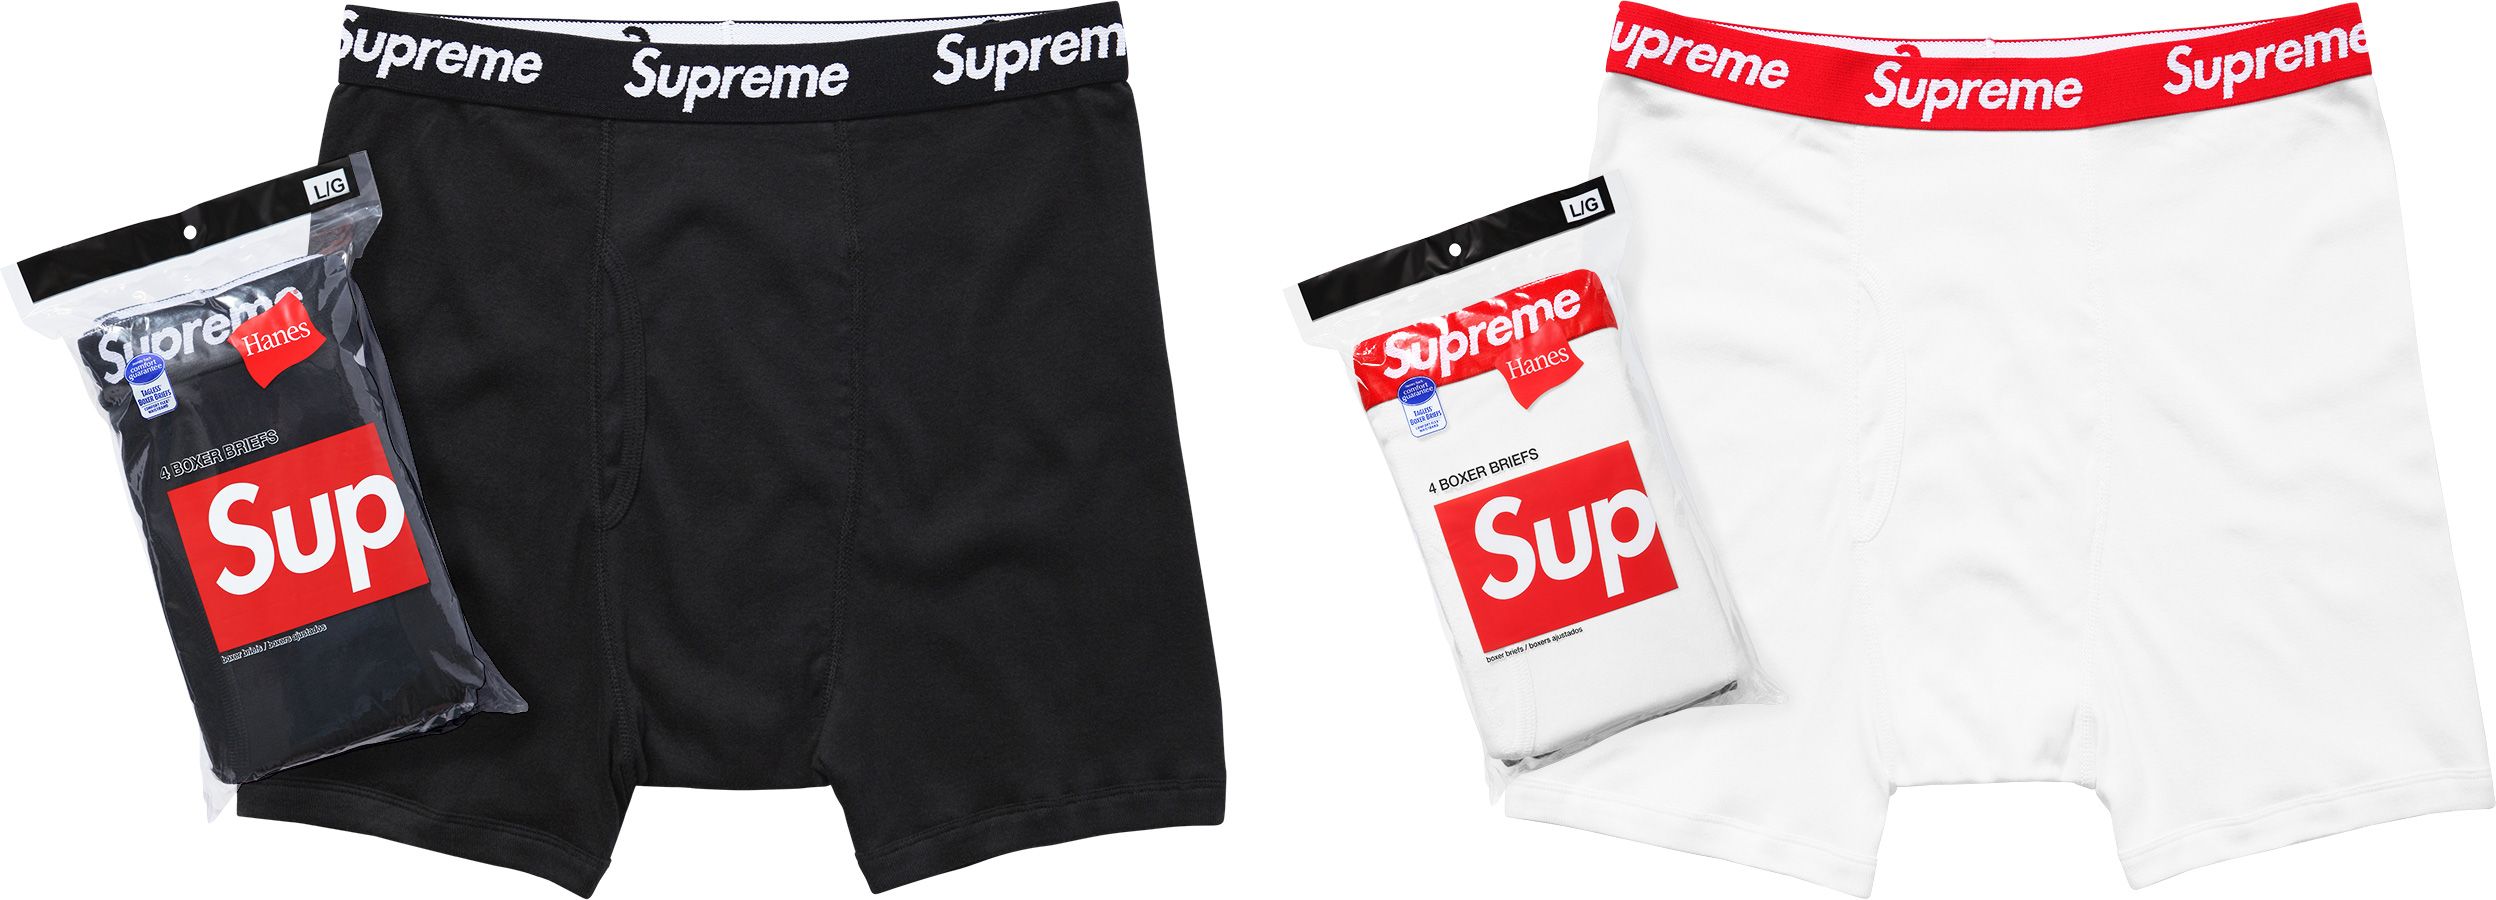 Supreme®/Hanes® Boxer Briefs (4 Pack) - Spring/Summer 2021 Preview 